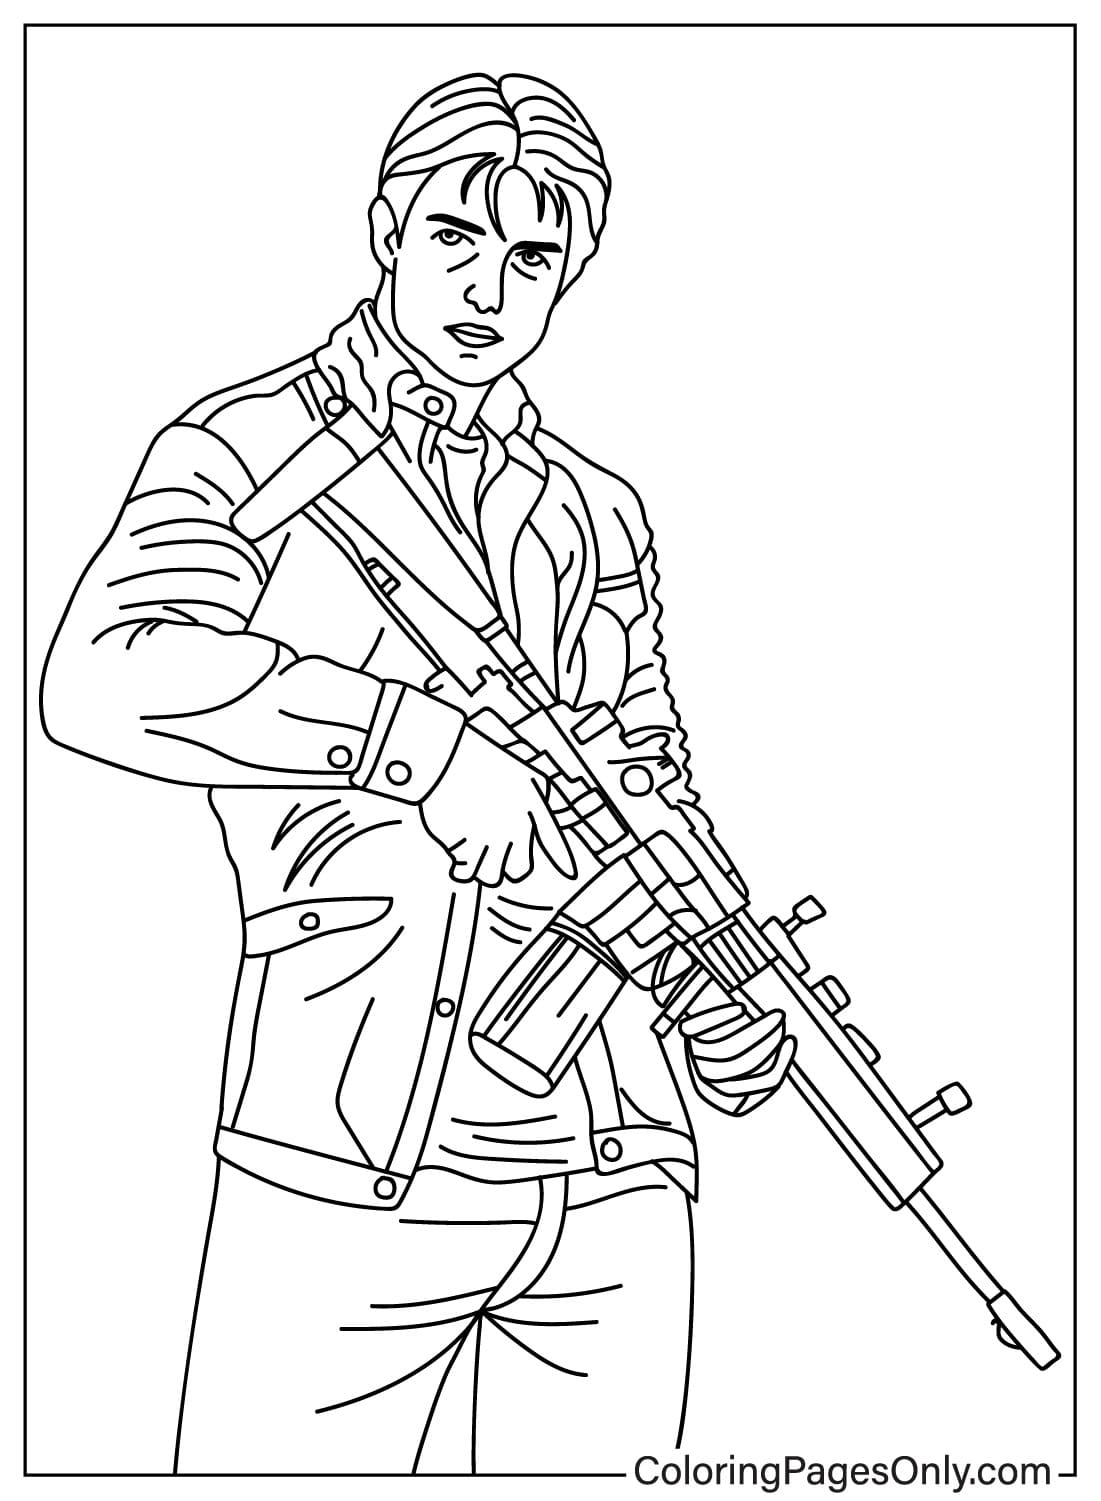 Free Printable Tom Cruise Coloring Page from Tom Cruise